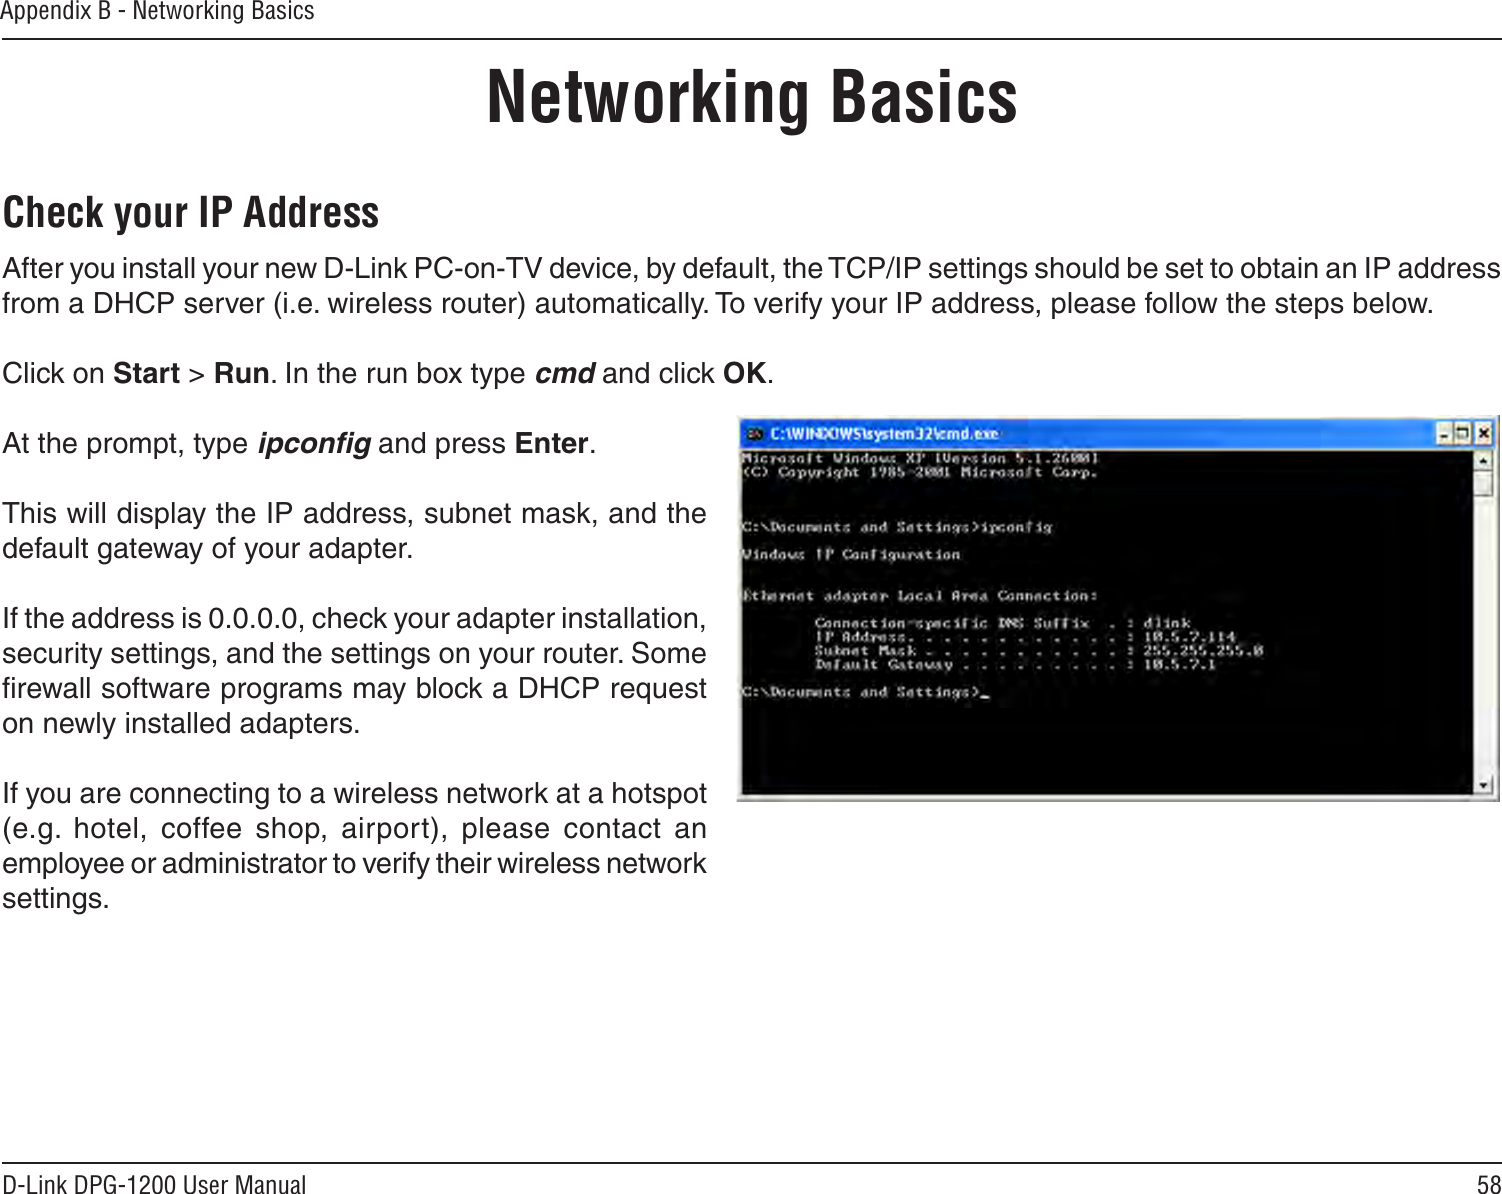 58D-Link DPG-1200 User ManualAppendix B - Networking BasicsNetworking BasicsCheck your IP AddressAfter you install your new D-Link PC-on-TV device, by default, the TCP/IP settings should be set to obtain an IP address from a DHCP server (i.e. wireless router) automatically. To verify your IP address, please follow the steps below.Click on Start &gt; Run. In the run box type cmd and click OK.At the prompt, type ipconﬁg and press Enter.This will display the IP address, subnet mask, and the default gateway of your adapter.If the address is 0.0.0.0, check your adapter installation, security settings, and the settings on your router. Some ﬁrewall software programs may block a DHCP request on newly installed adapters. If you are connecting to a wireless network at a hotspot (e.g.  hotel,  coffee  shop,  airport),  please  contact  an employee or administrator to verify their wireless network settings.